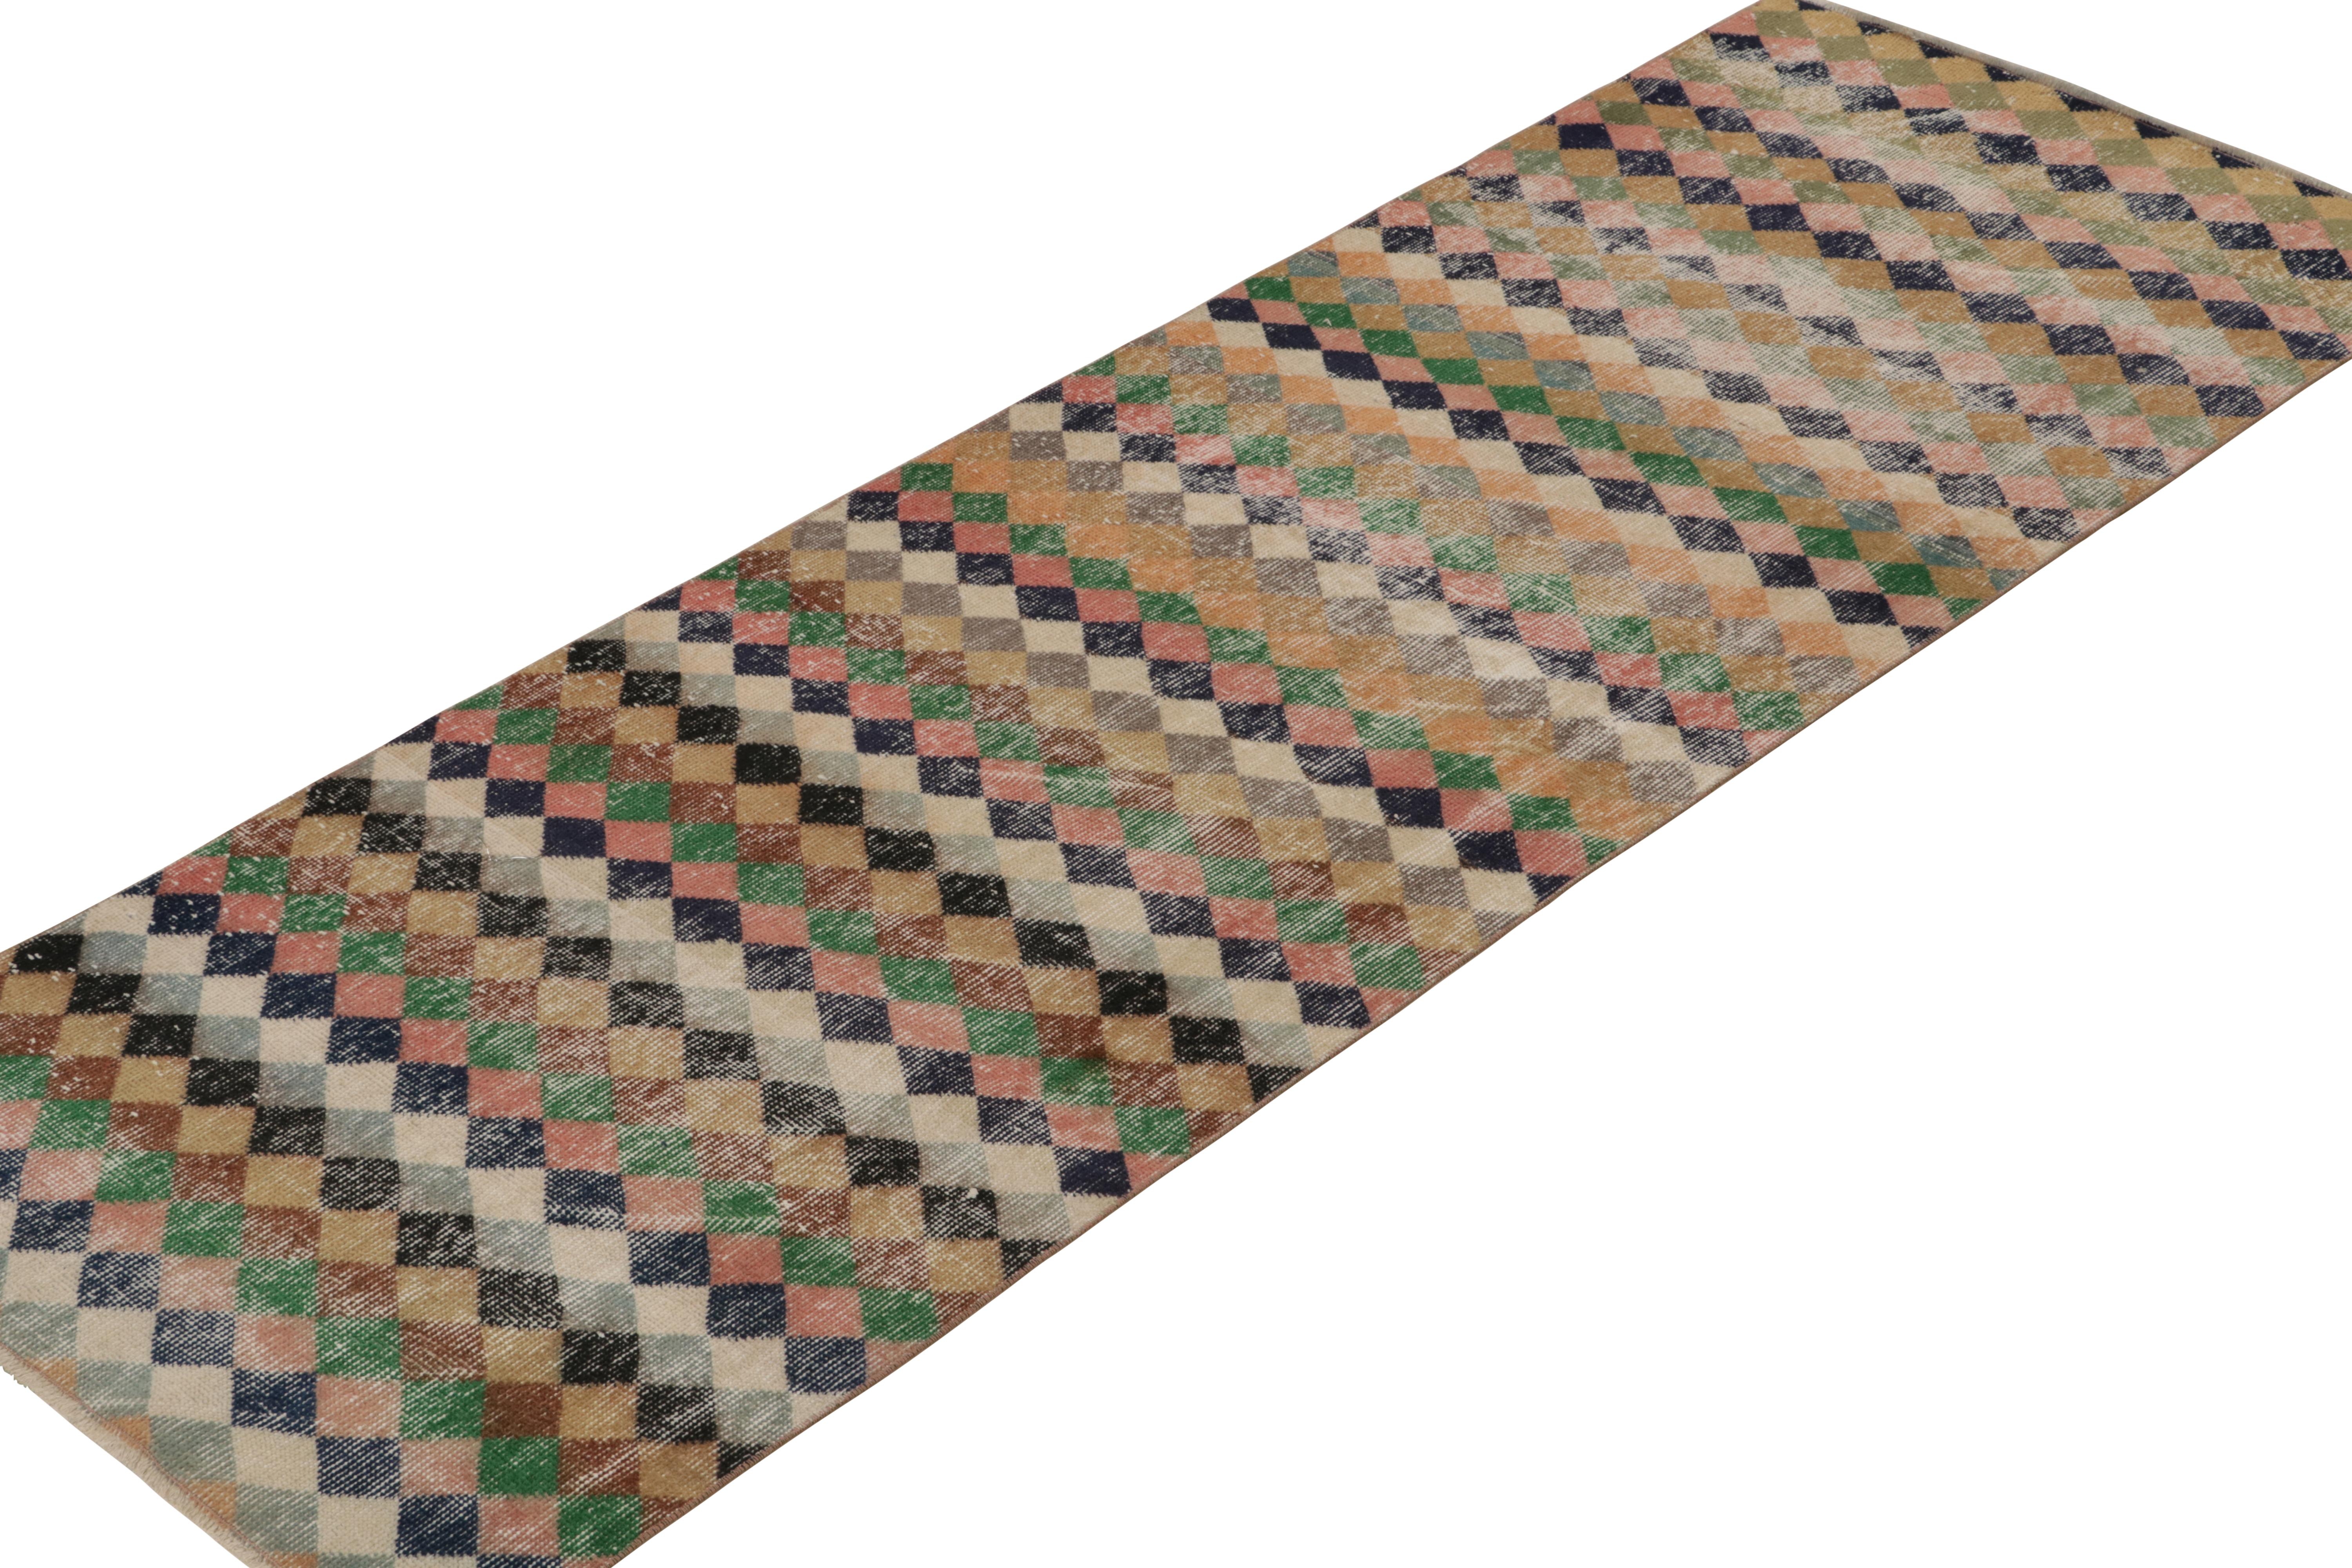 This vintage 3x9 runner is a new addition to Rug & Kilim’s commemorative Mid-Century Pasha Collection. This line is a commemoration of rare curations we believe to hail from mid-century Turkish designer Zeki Müren.

Further on the Design:

This